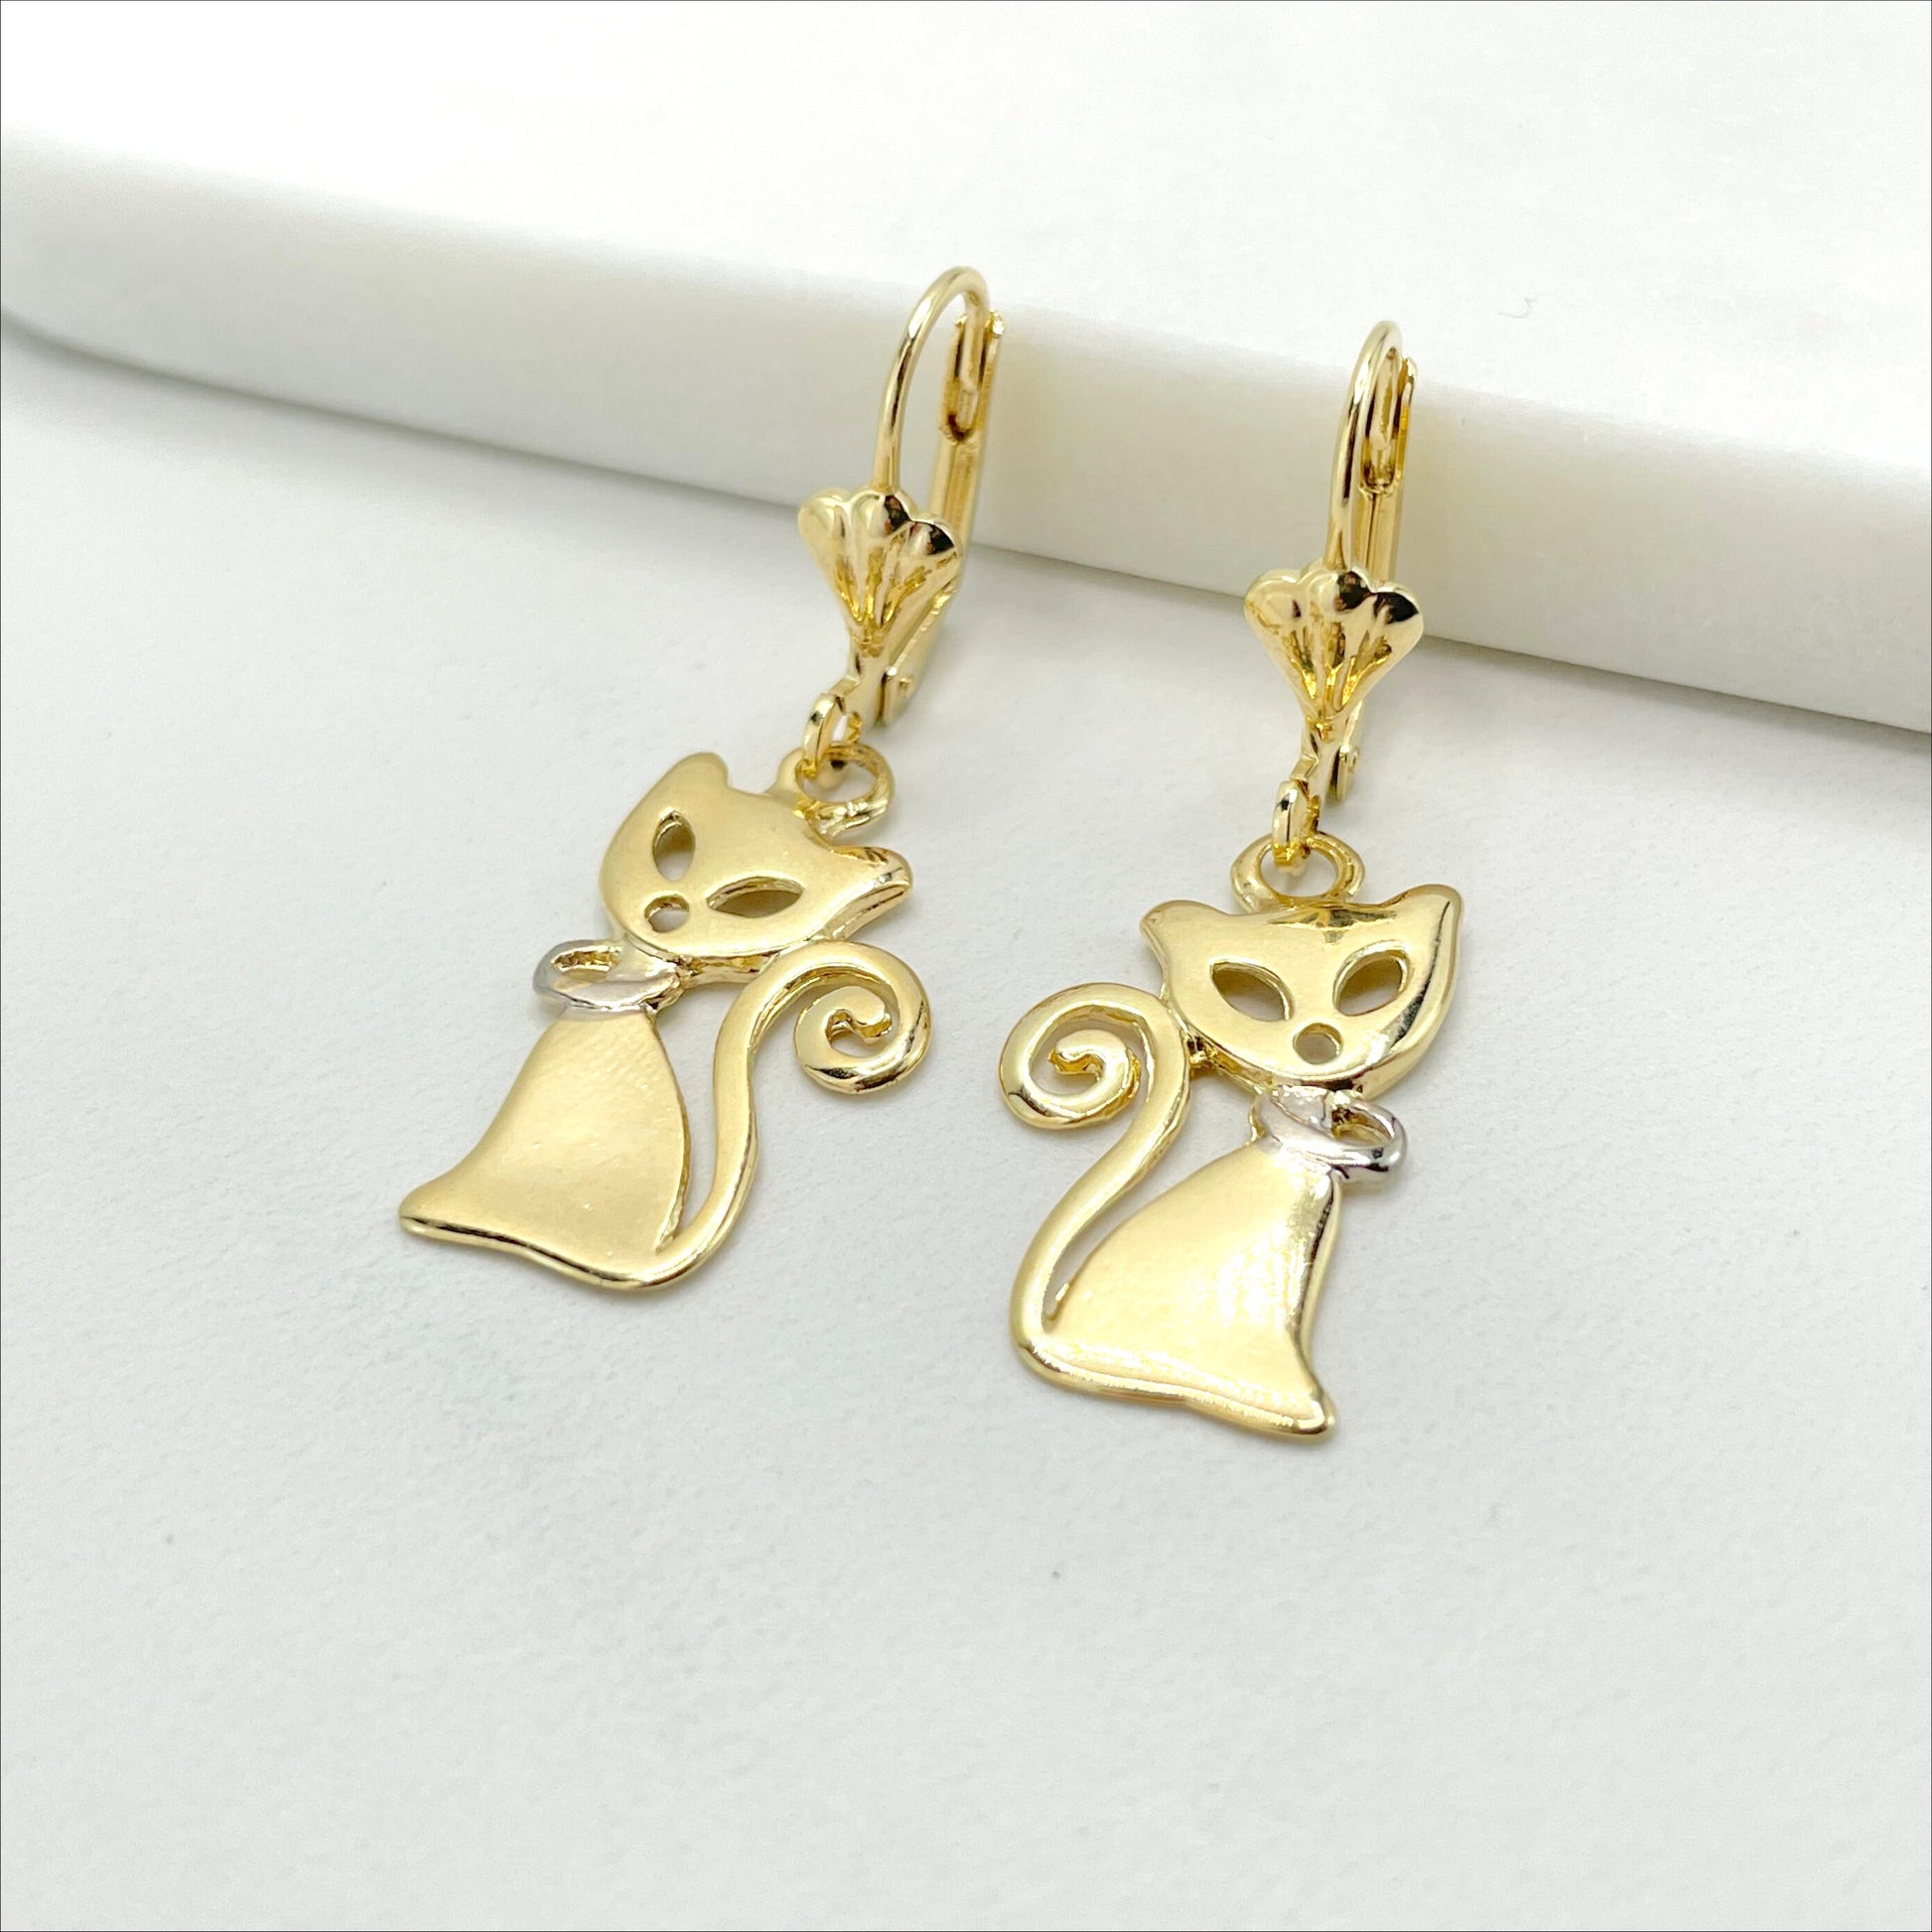 18k Gold Filled Cutie Charming Stylized Cat Shape Design Earrings and Pendant Set, Wholesale Jewelry Making Supplies